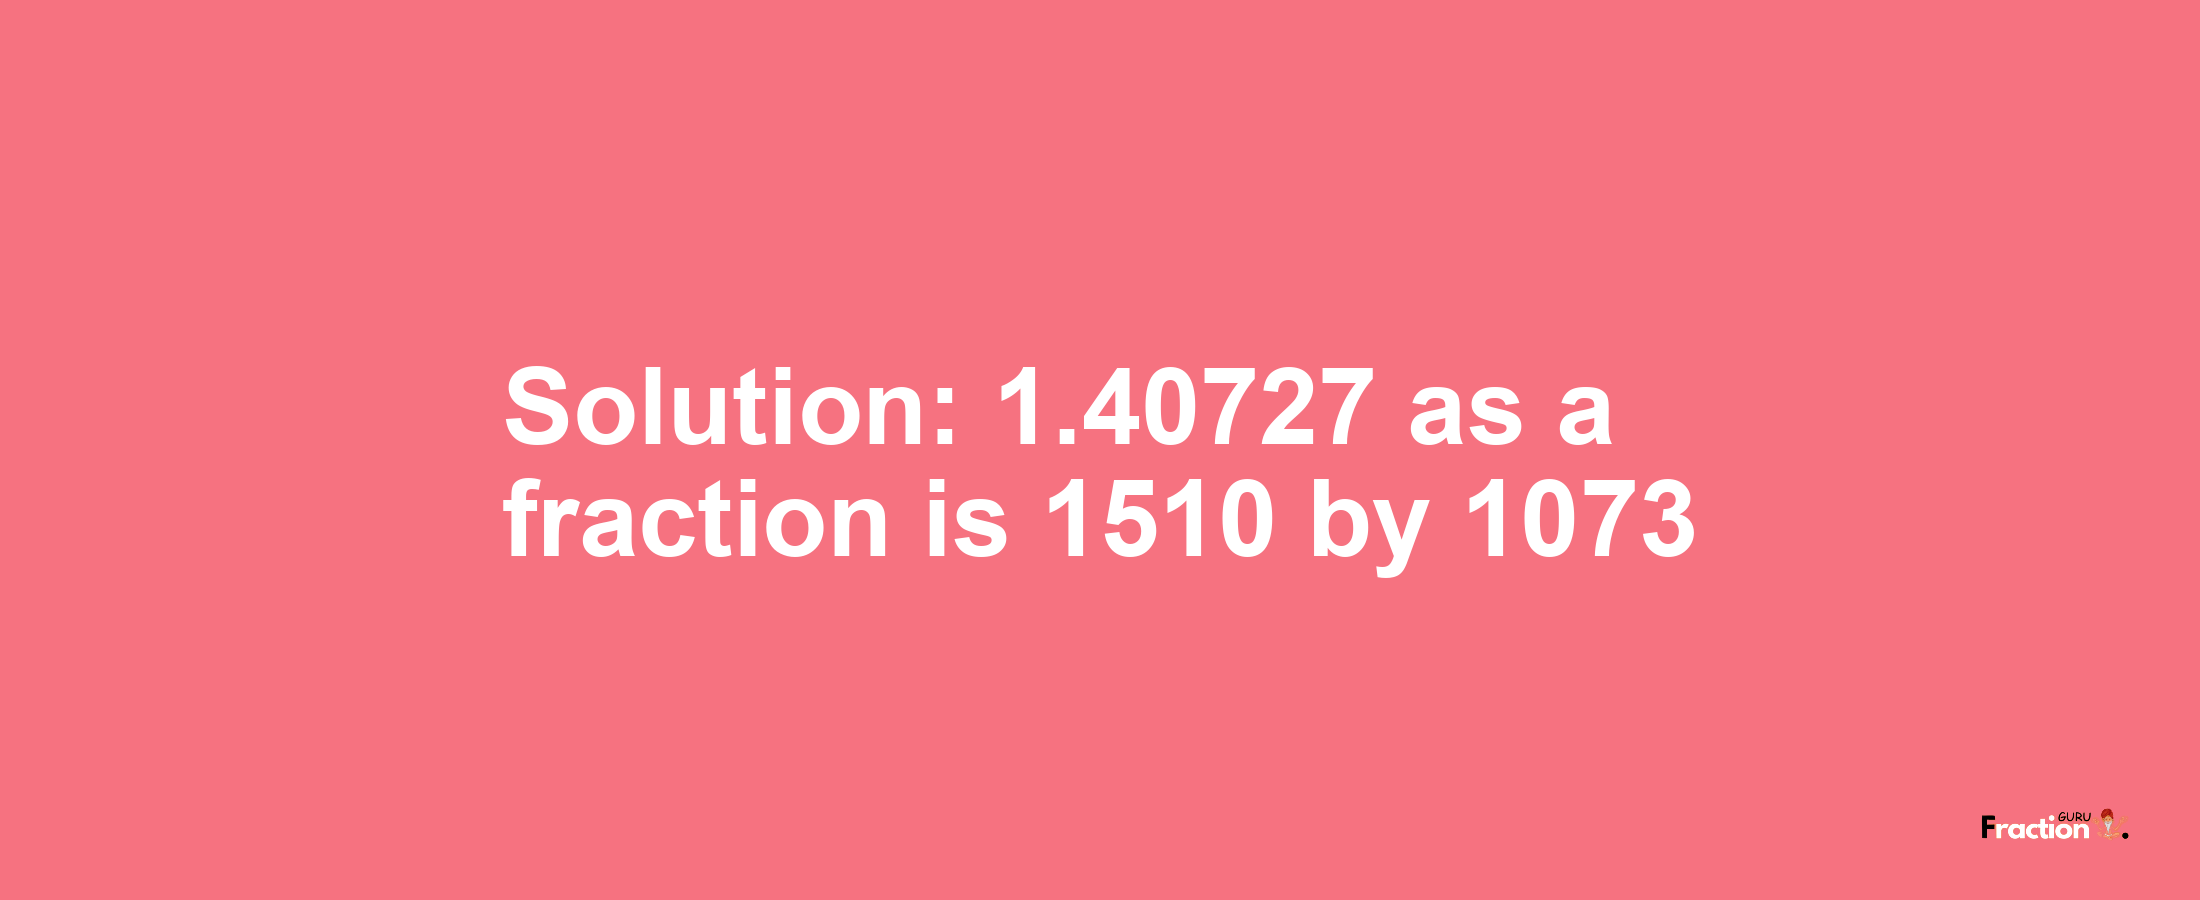 Solution:1.40727 as a fraction is 1510/1073